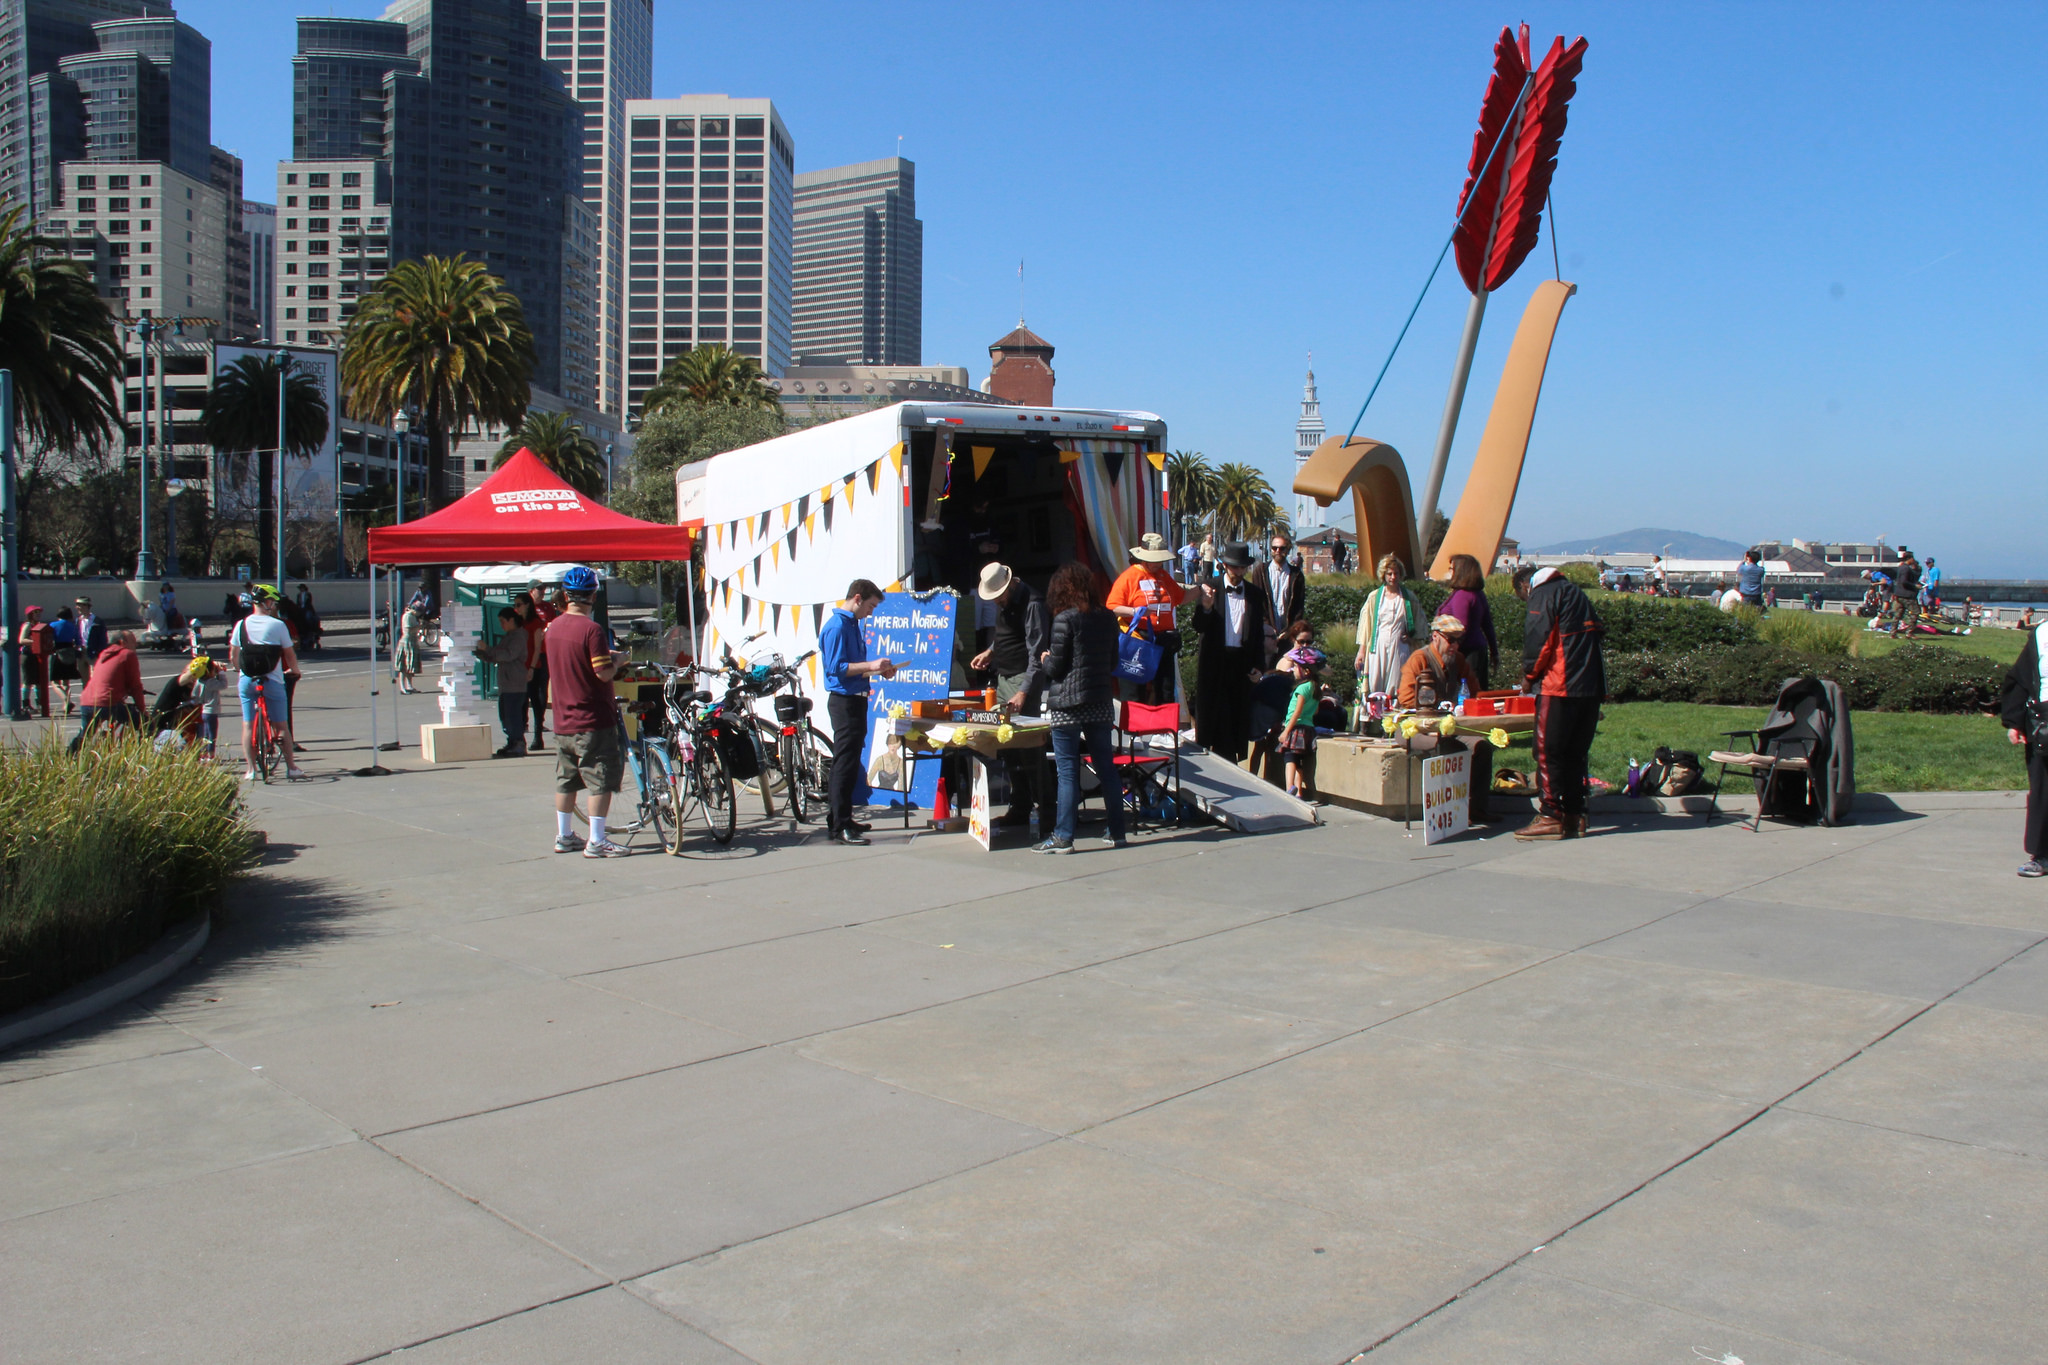  2015  Interactive performance installation presented in collaboration with SFMOMA, San Francisco Sunday Streets,&nbsp;and Everyhere Logistics.  Companion piece to the Cult of Emperor Norton by Kasey Smith and Christopher Ory, 2013.&nbsp; 